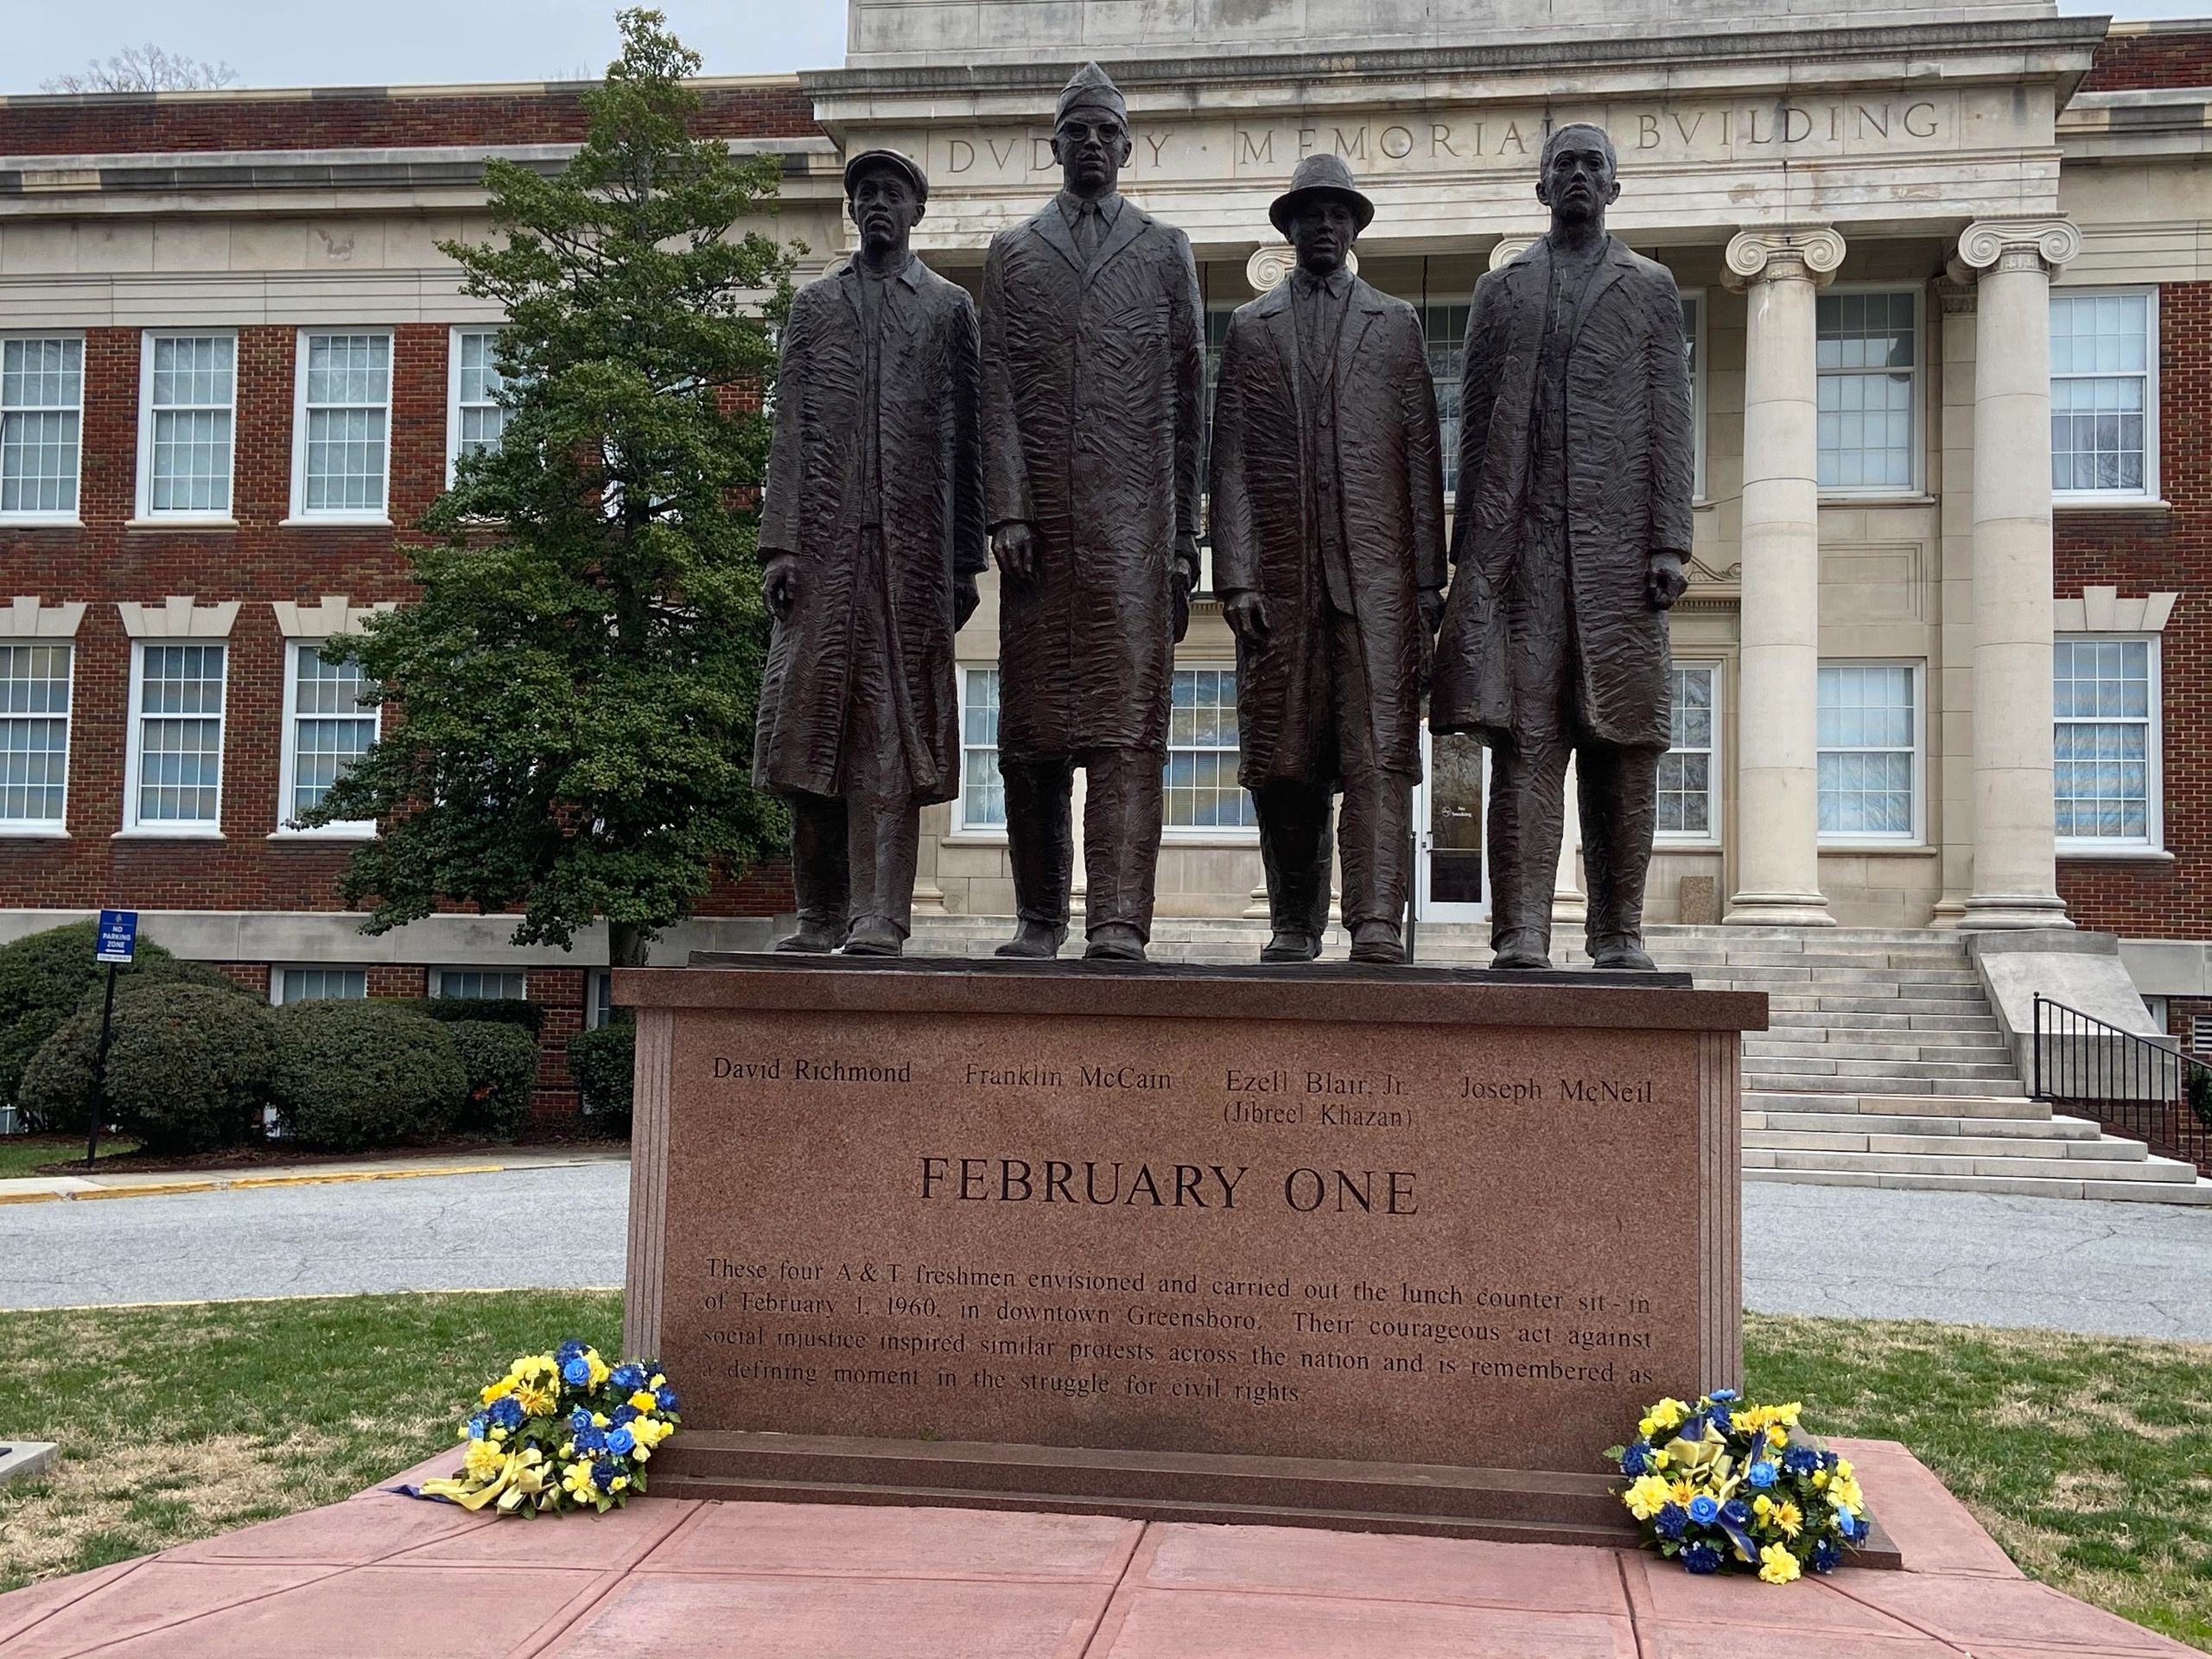 Name: February One statue

Description: Statue on the  campus of North Carolina A&T honoring the fou